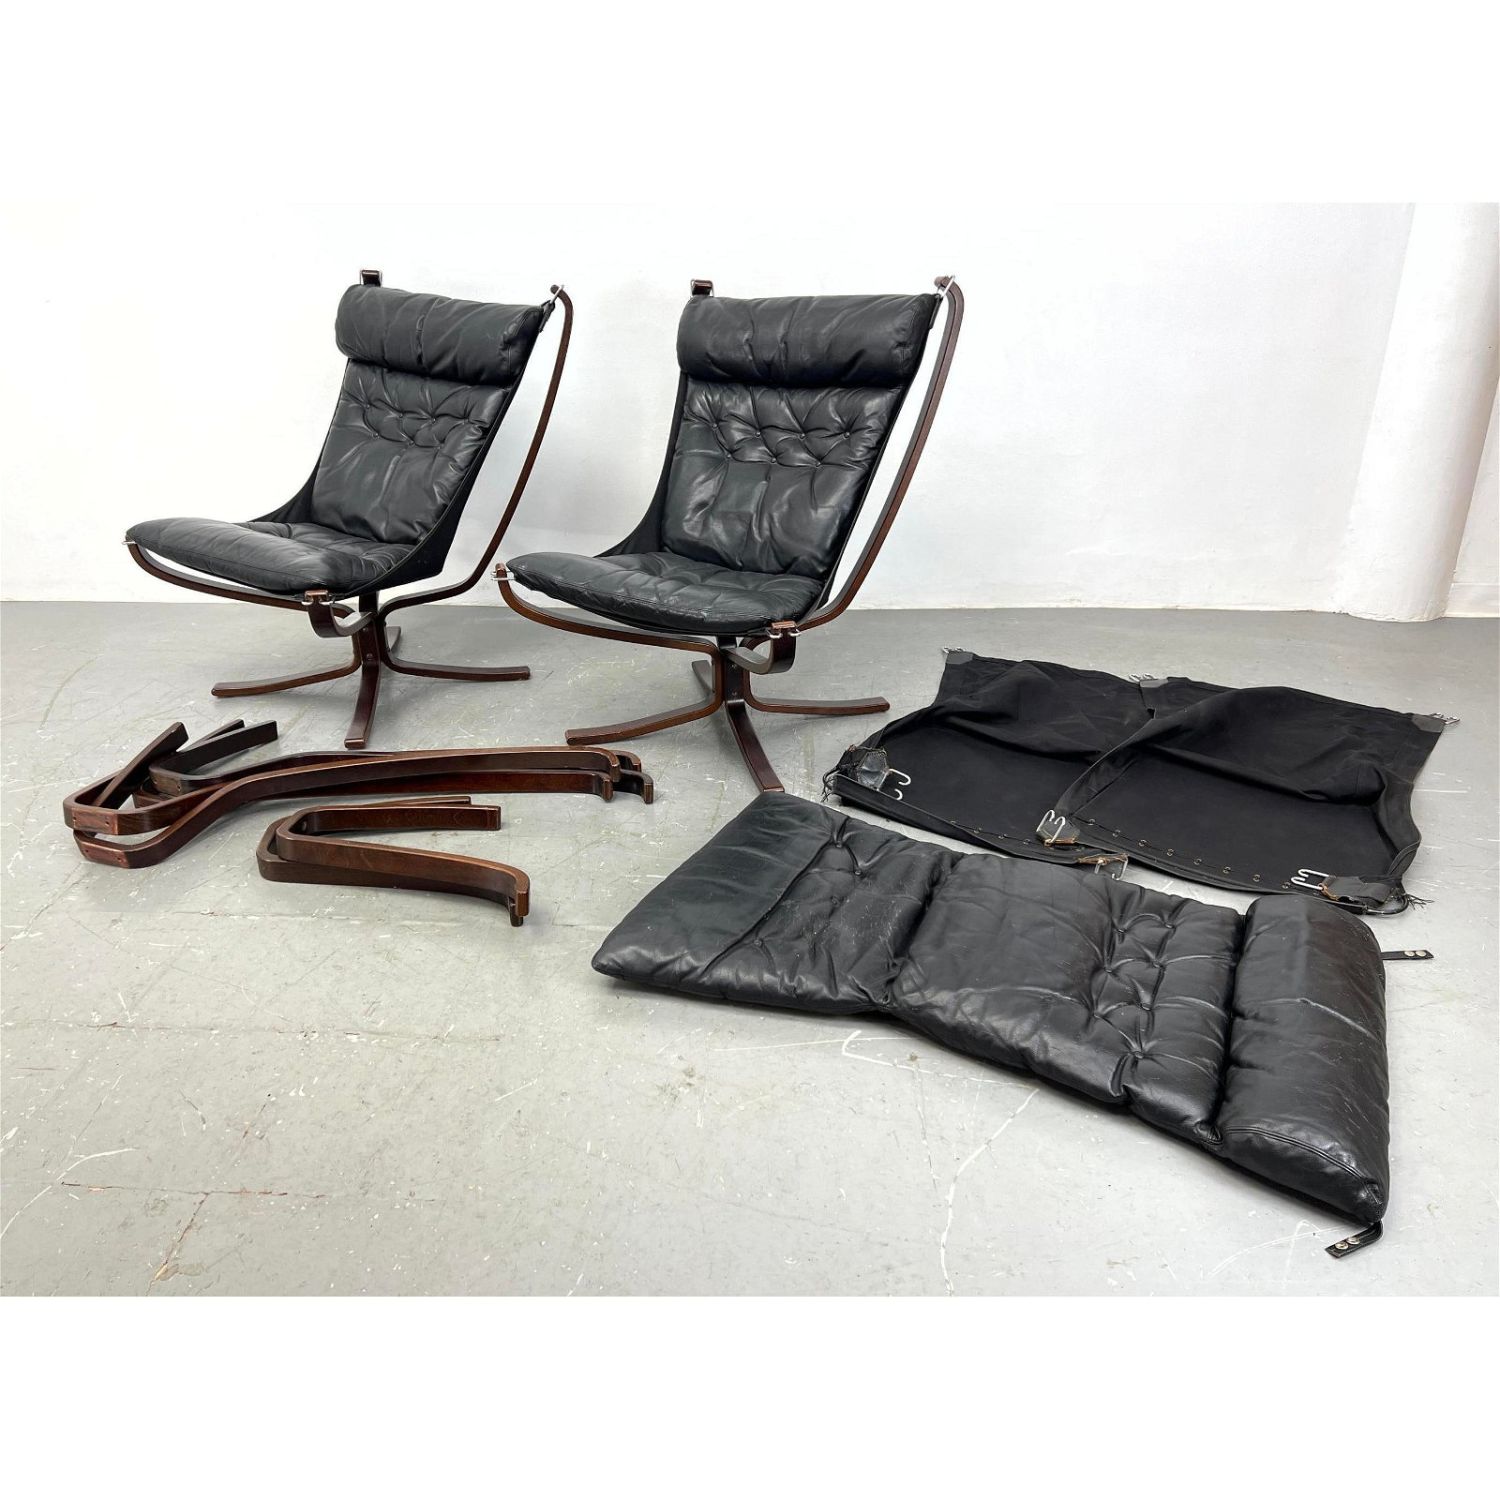 Pr Falcon chairs by SIGURD RUSSELL  362cab